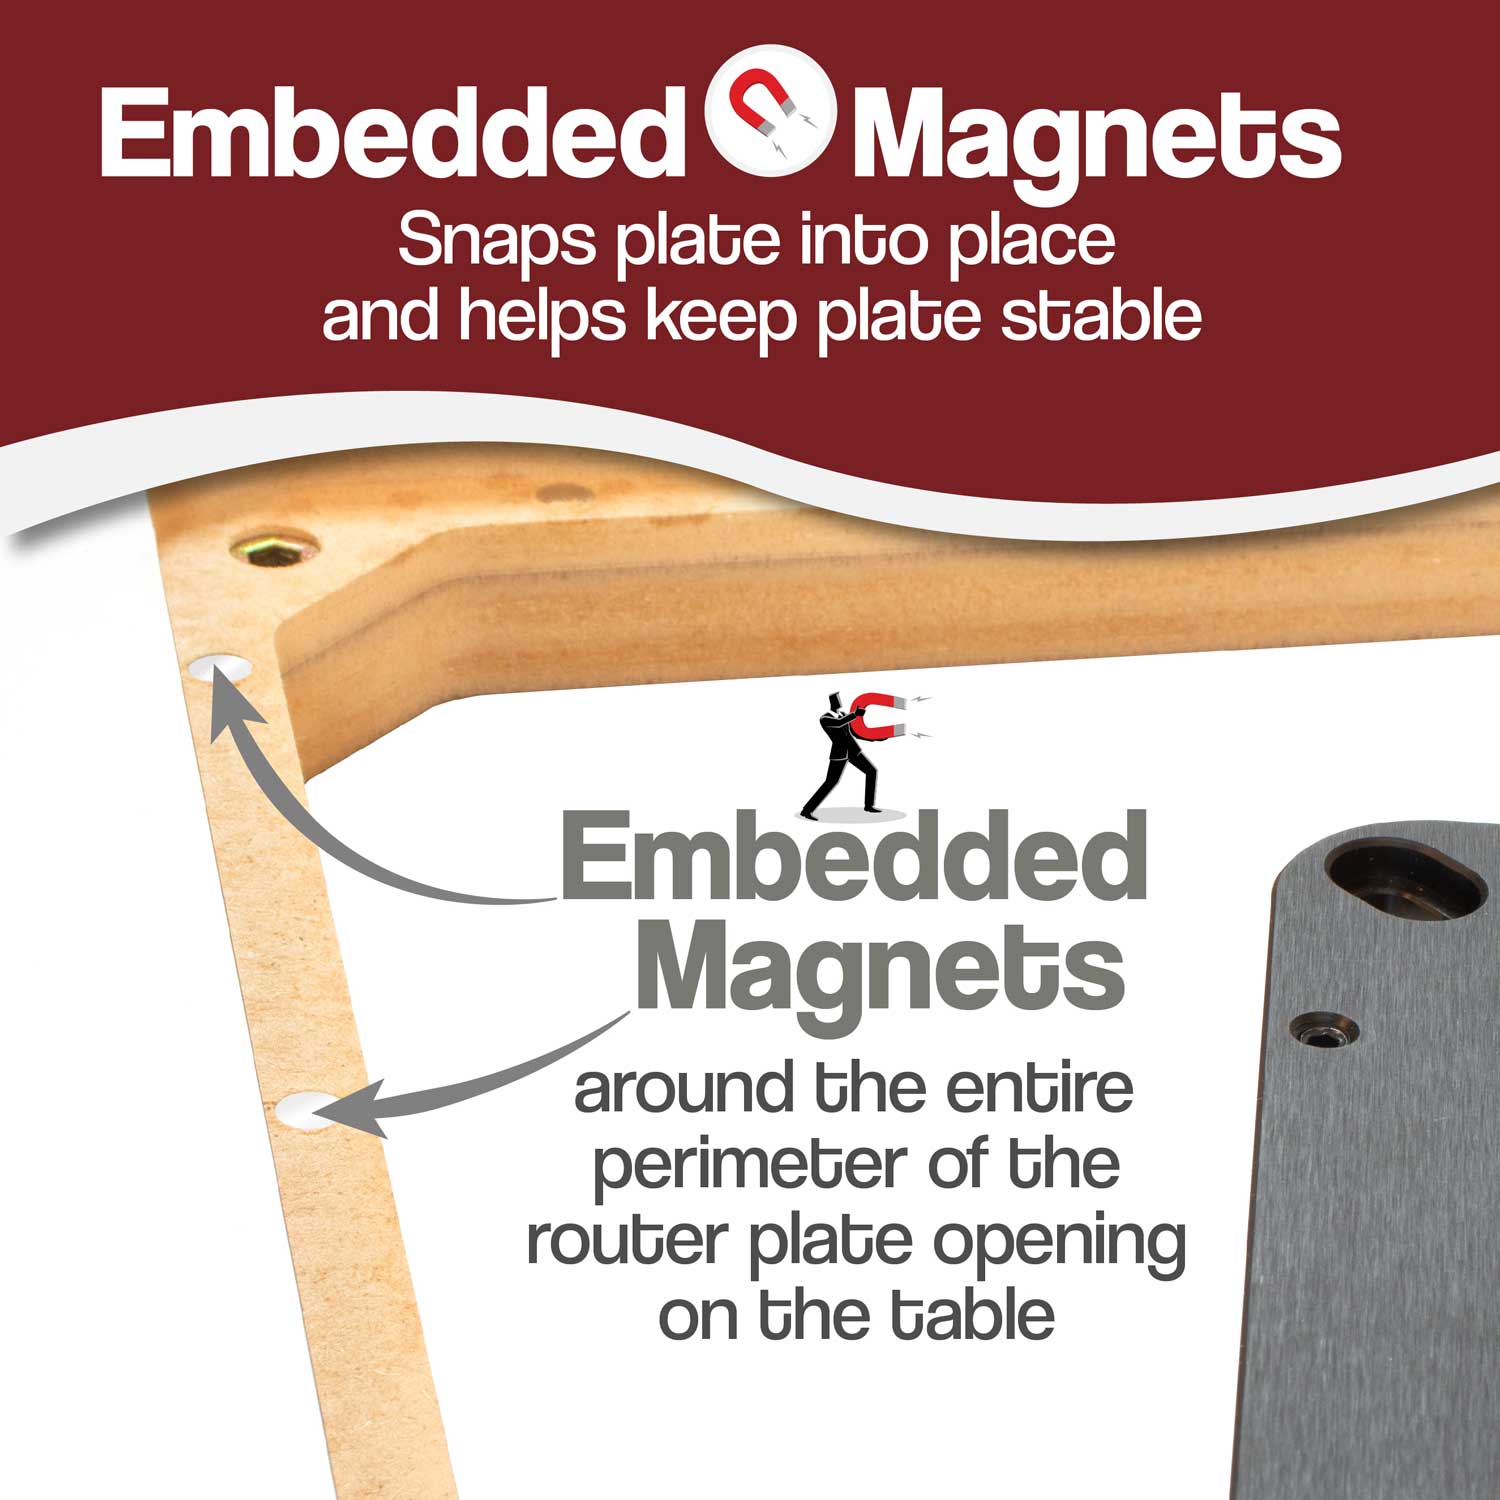 Embedded magnets around the entire perimeter of the router plate opening on the table